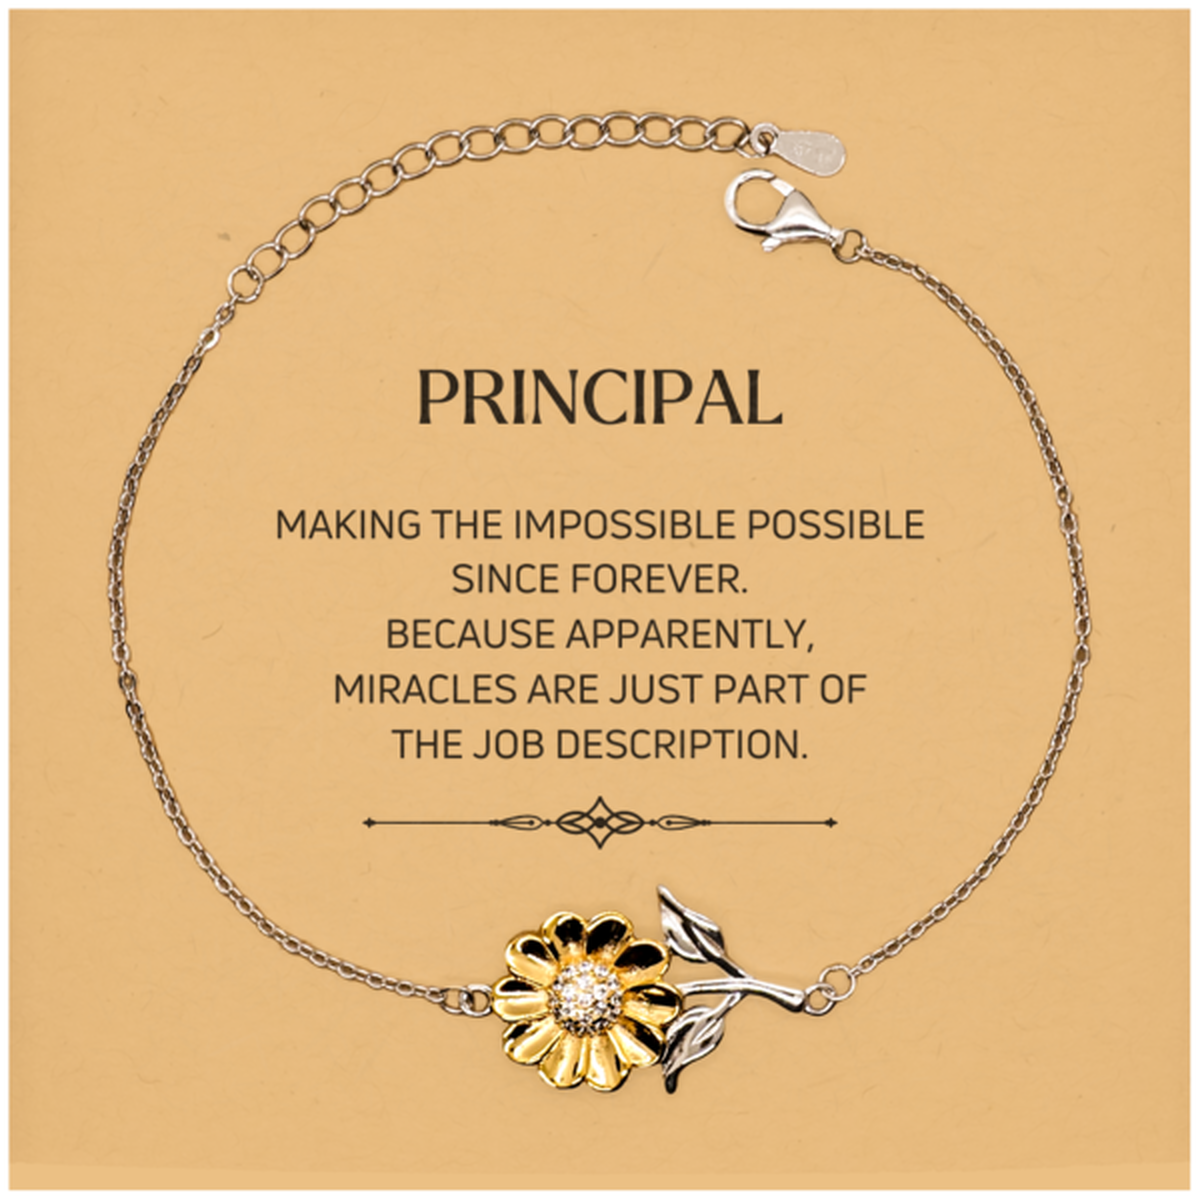 Funny Principal Gifts, Miracles are just part of the job description, Inspirational Birthday Christmas Sunflower Bracelet For Principal, Men, Women, Coworkers, Friends, Boss